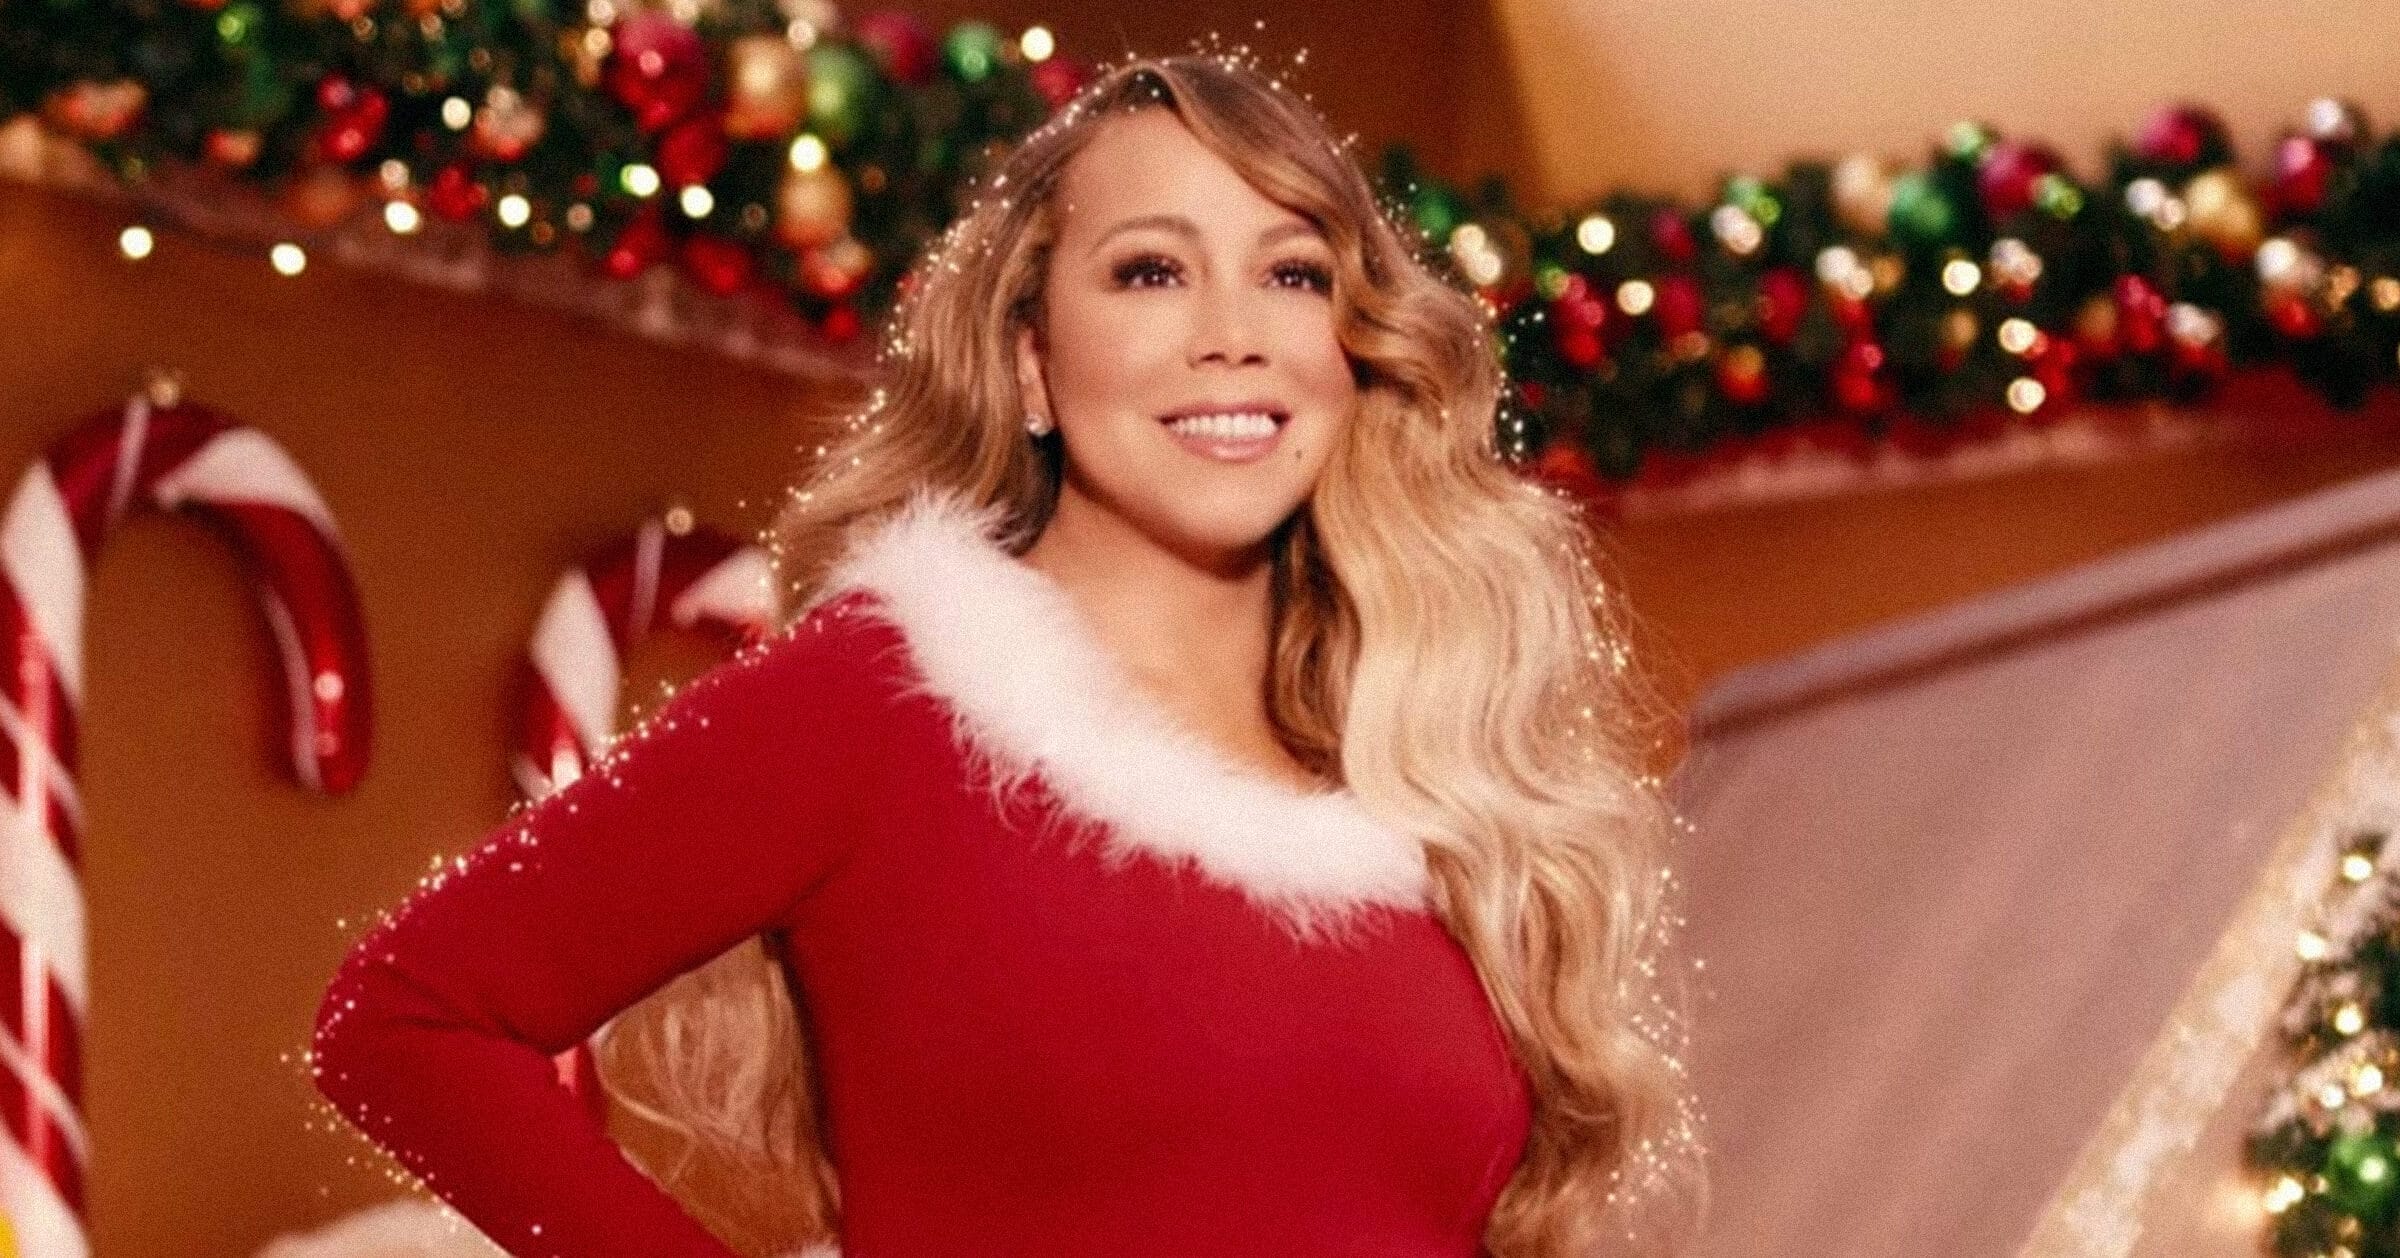 All I Want for Christmas Is You ของ Mariah Carey มารายห์ แครี